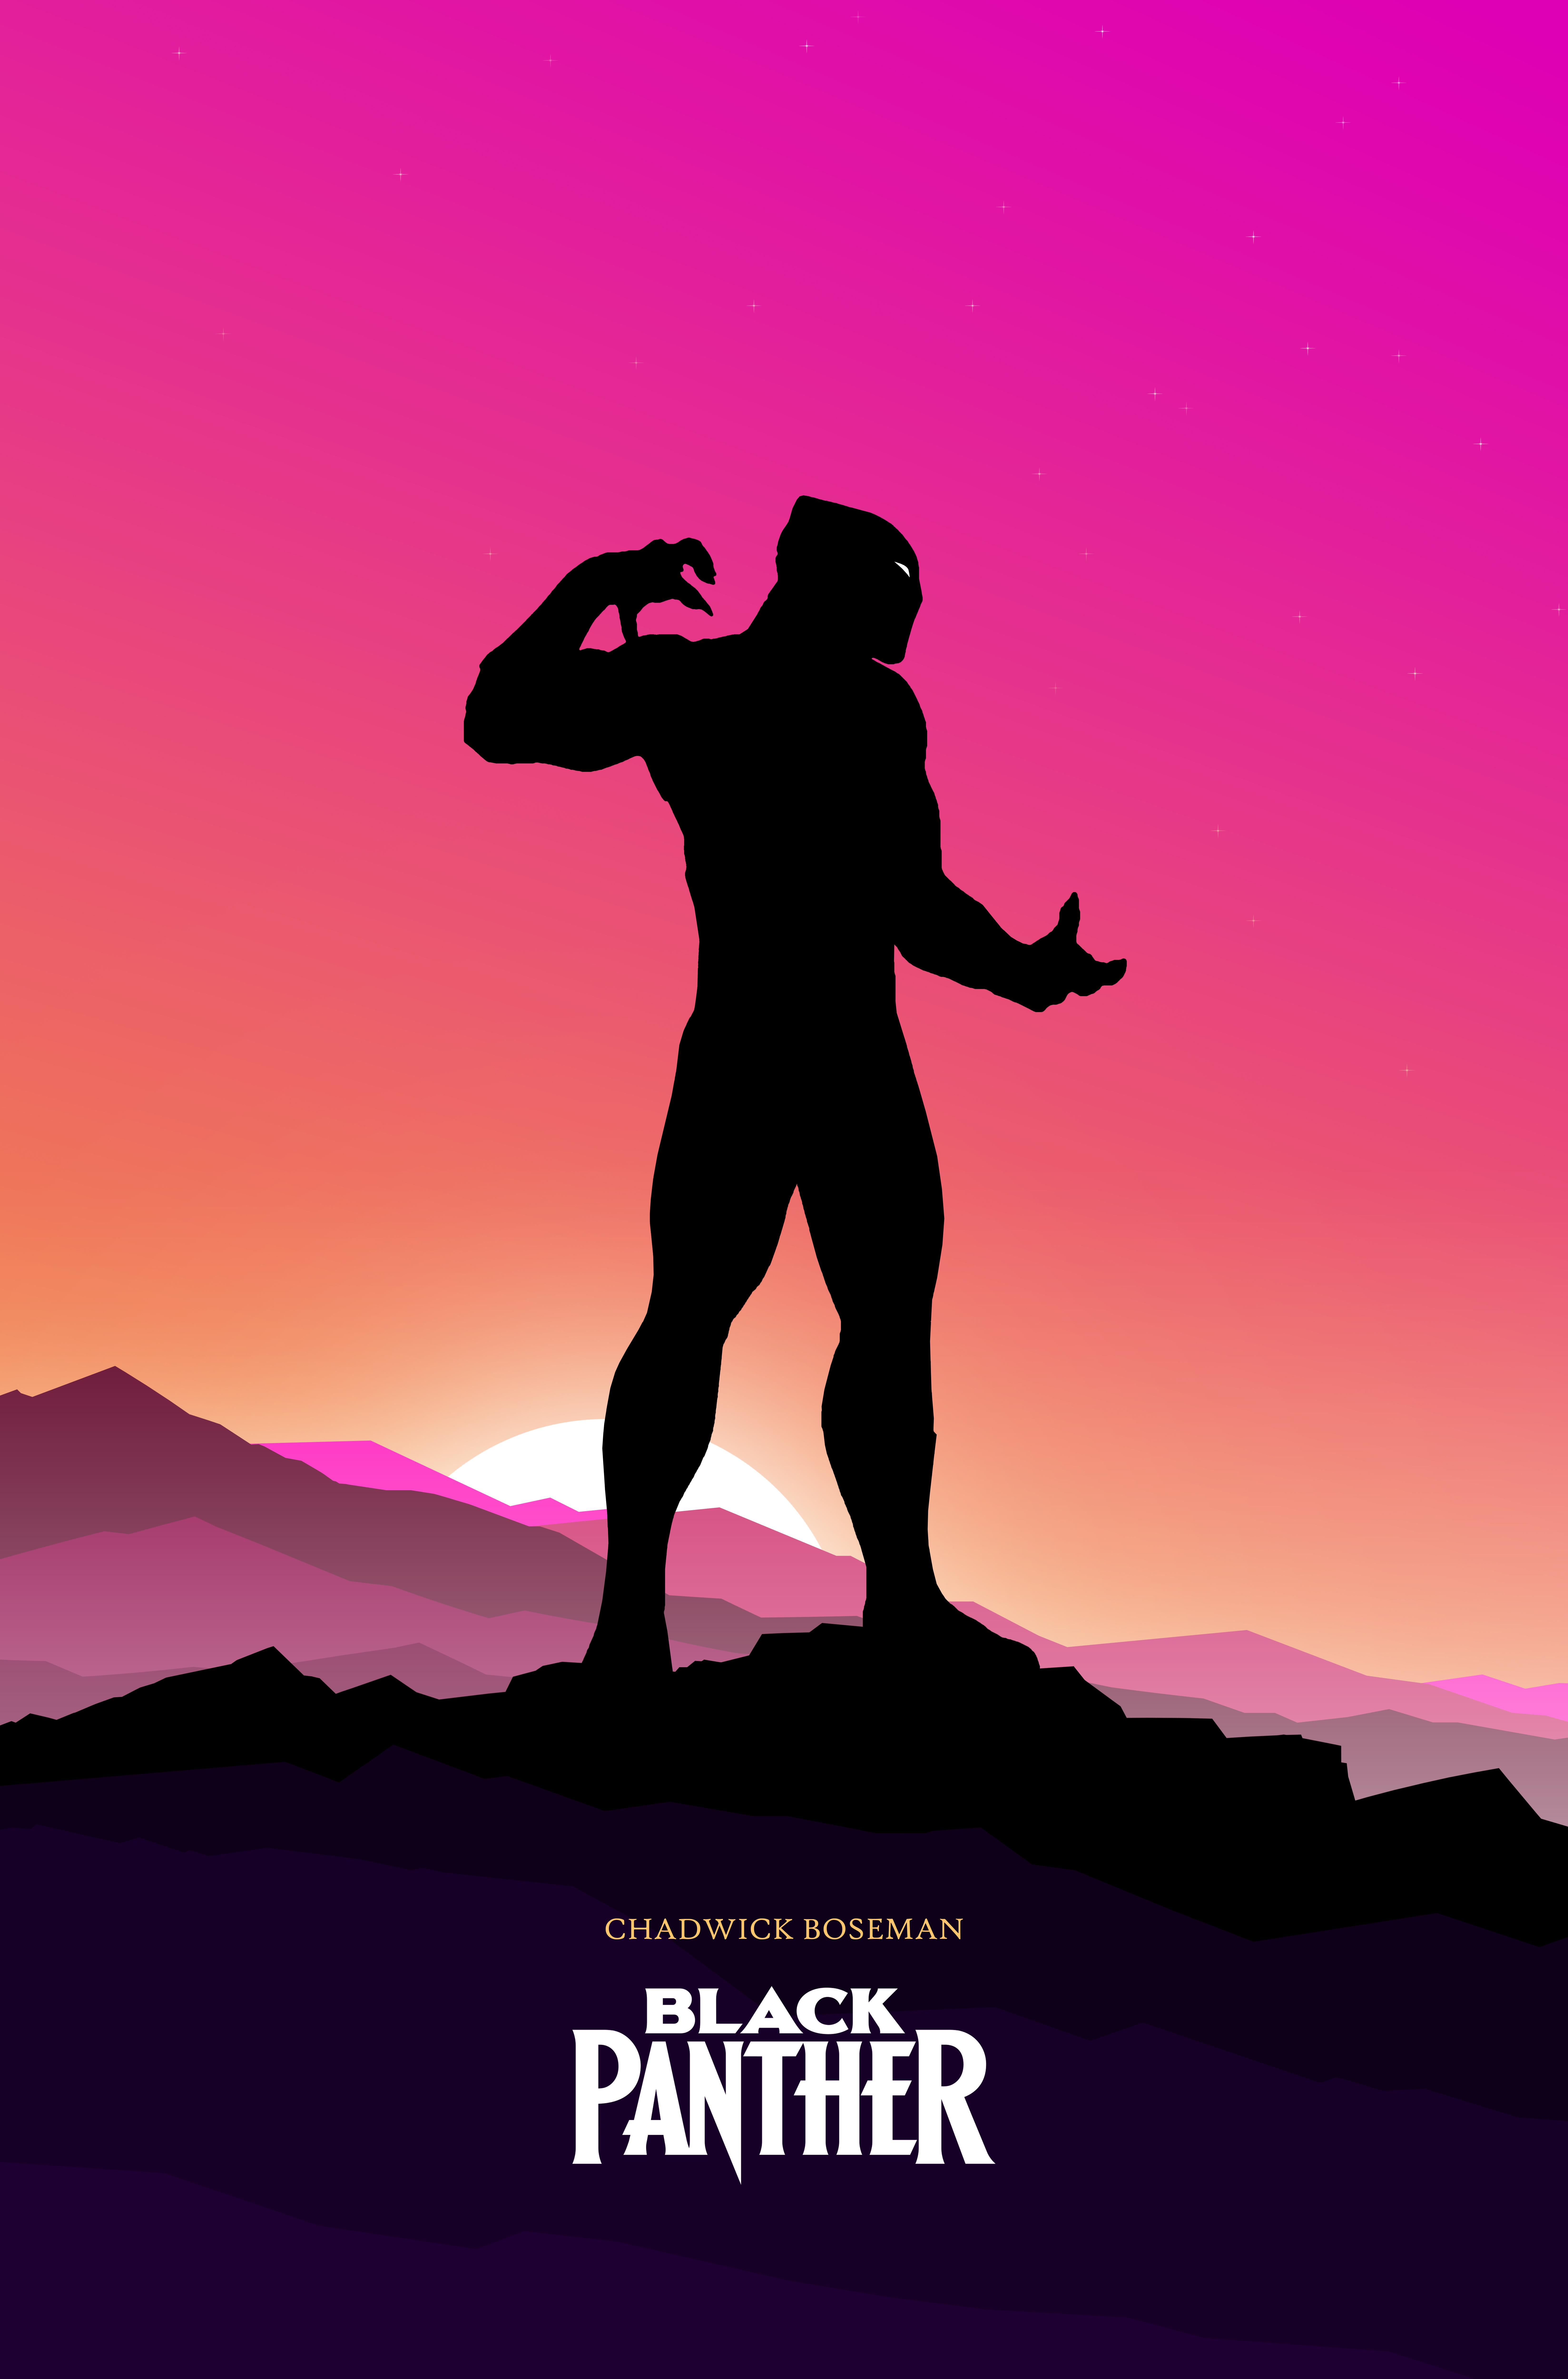 A silhouette of T'Challa, the Black Panther, standing on a rocky outcropping with his arms raised in the air. - Marvel, Avengers